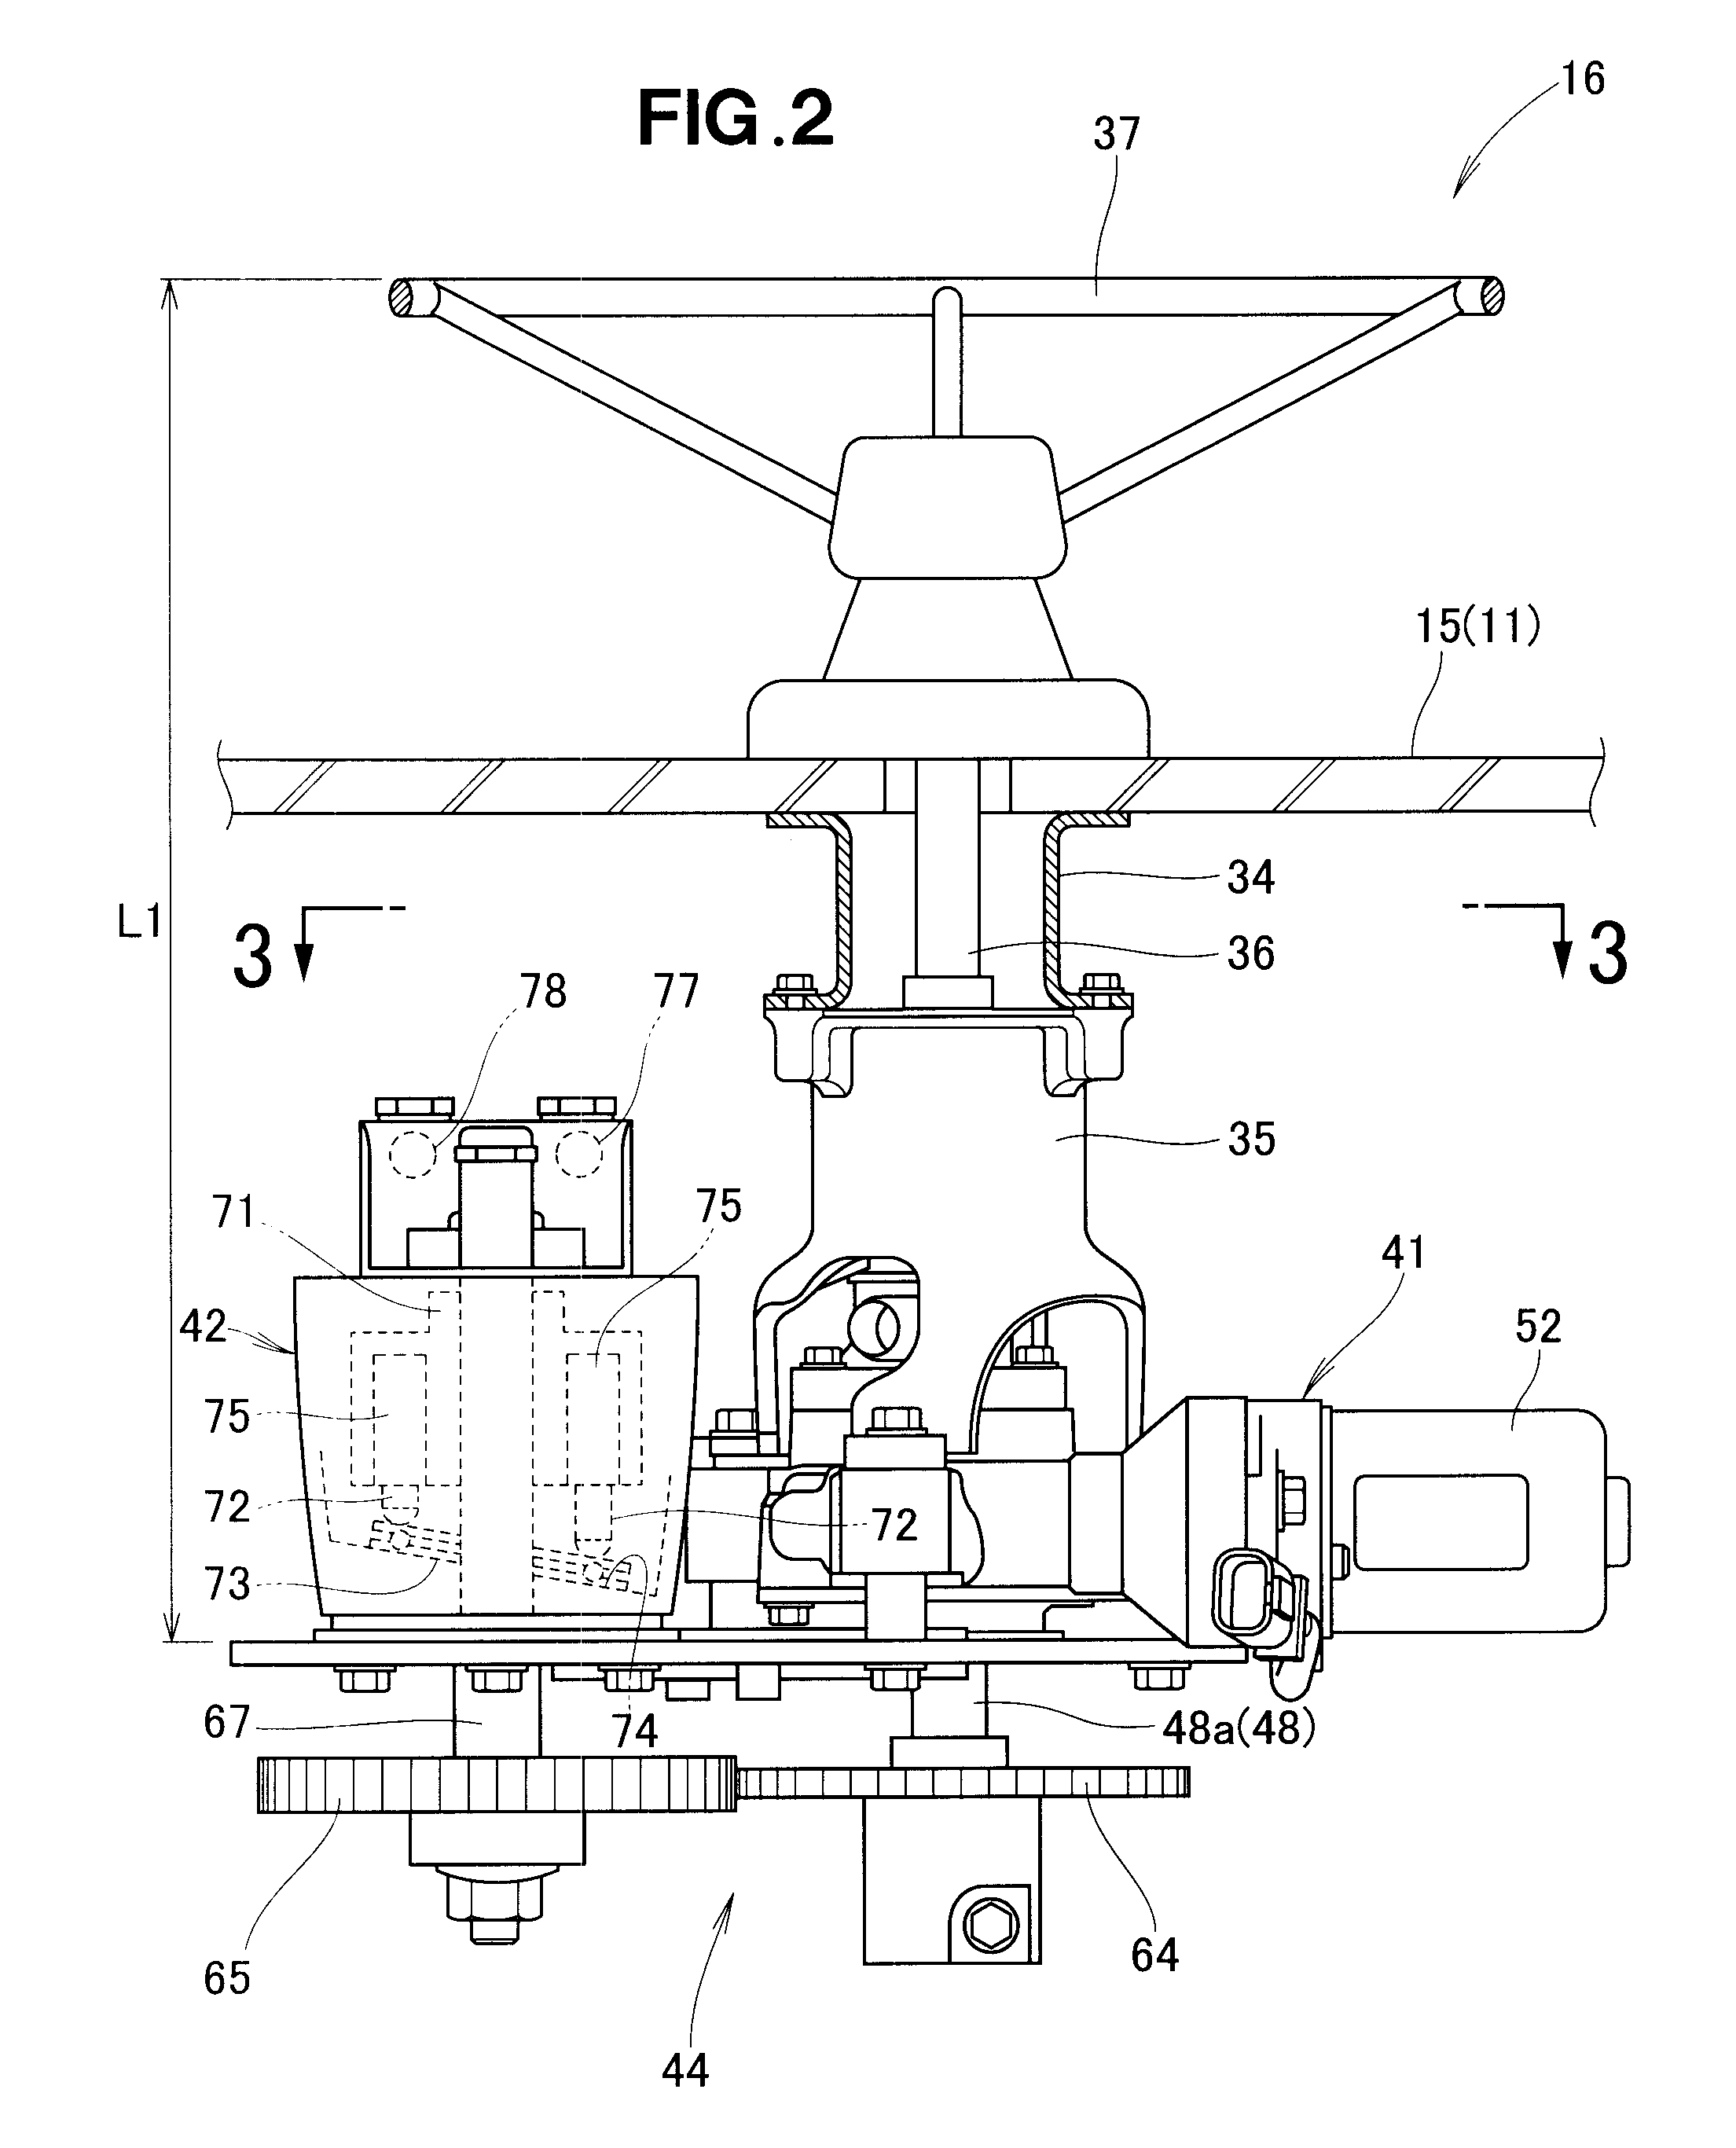 Steering device for outboard engine